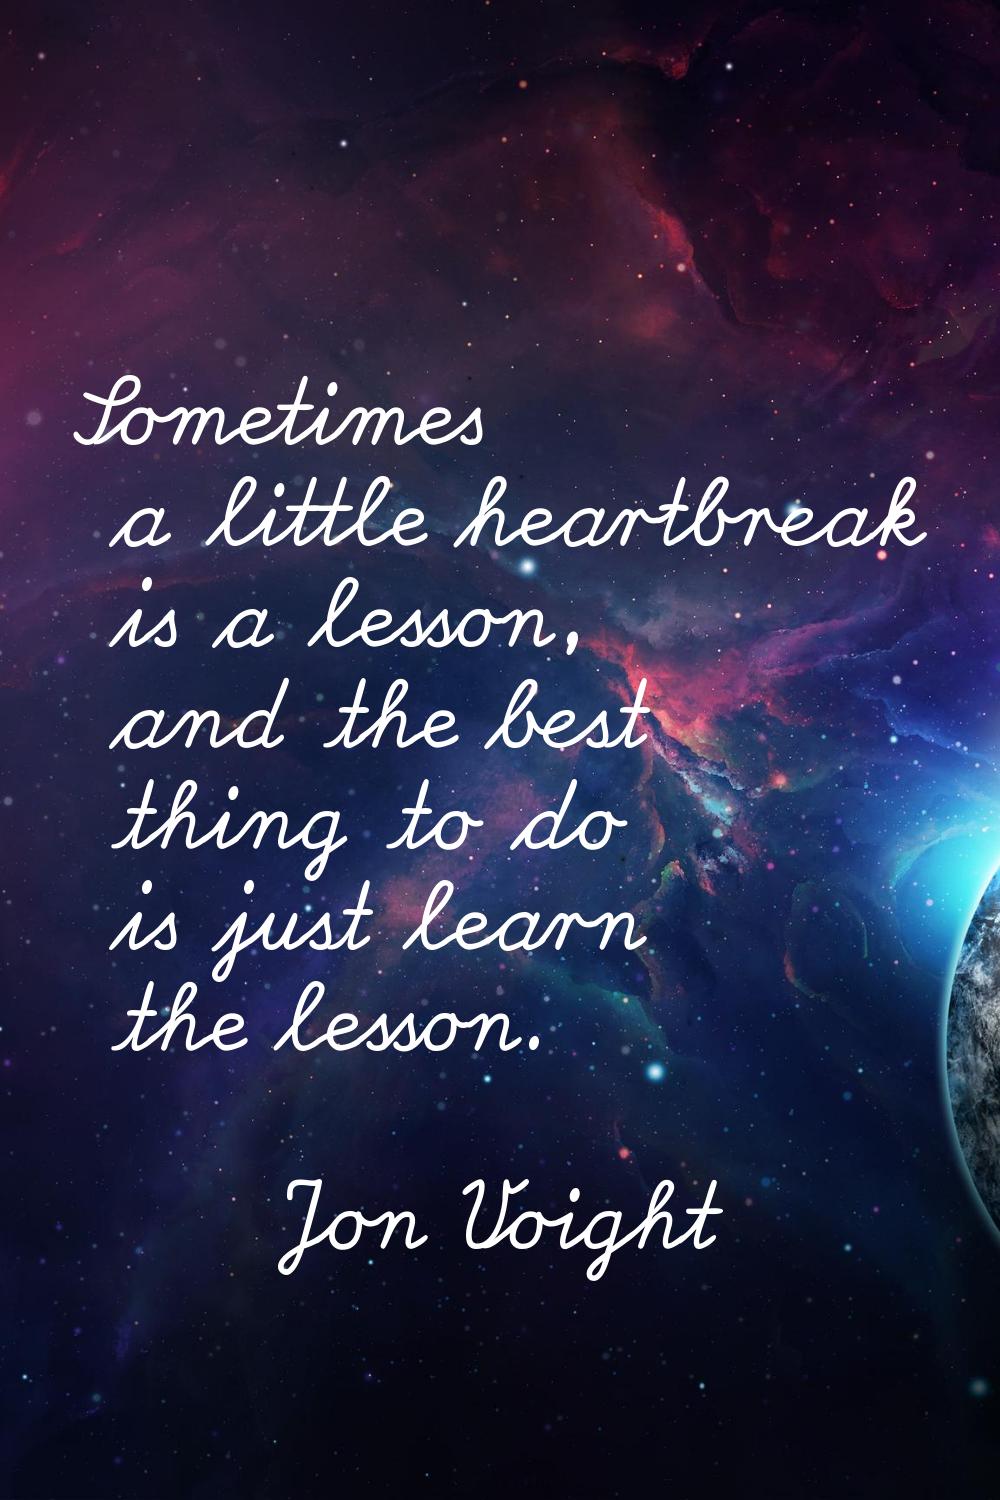 Sometimes a little heartbreak is a lesson, and the best thing to do is just learn the lesson.